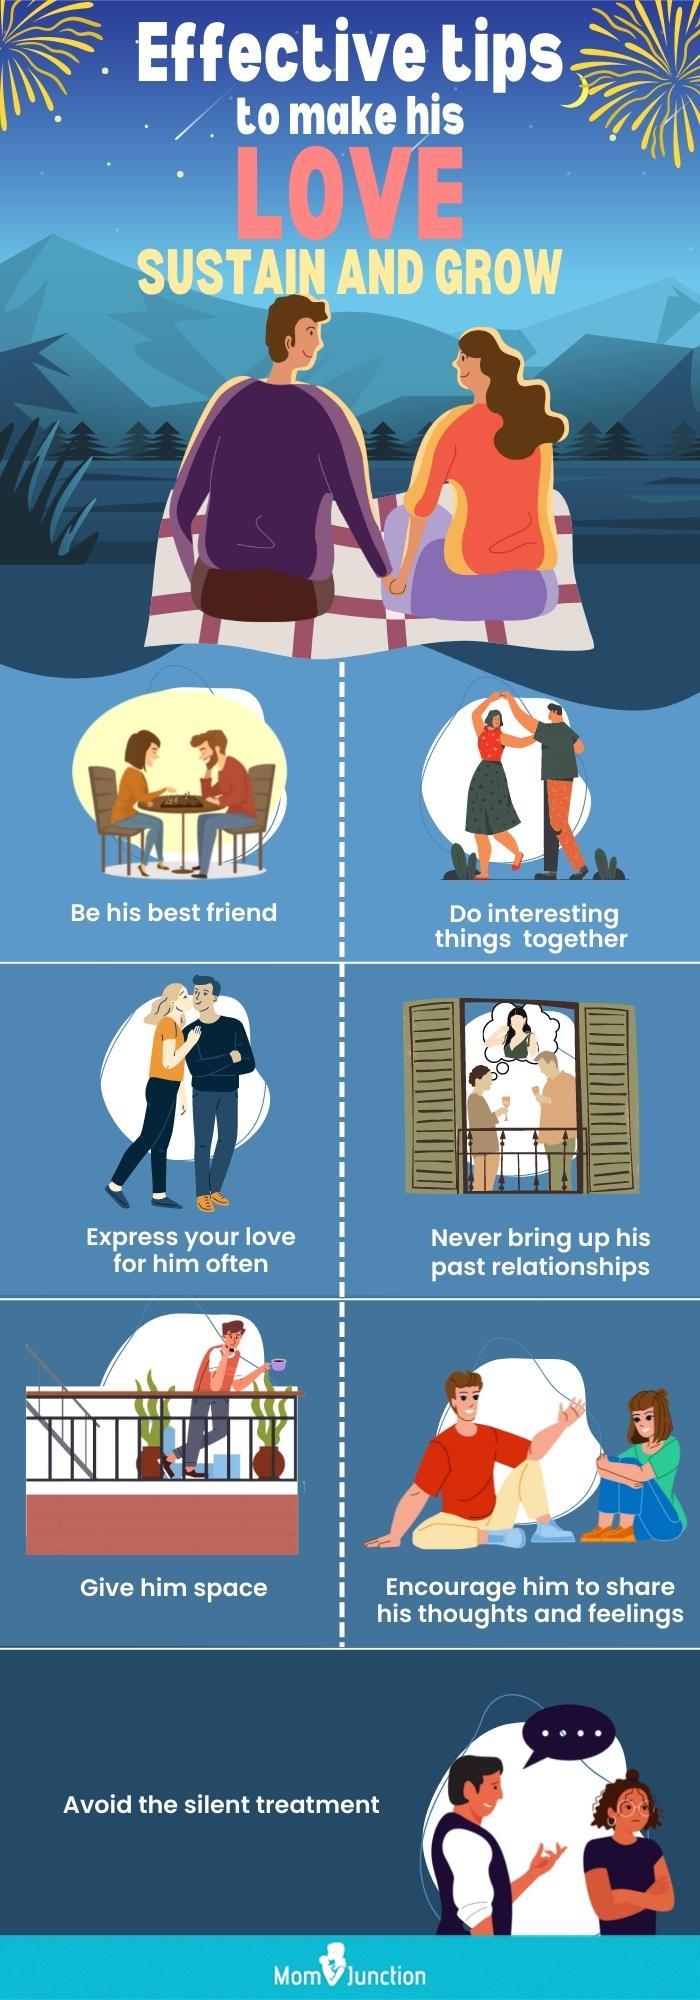 11 Differences Between How Men And Women Fall In Love